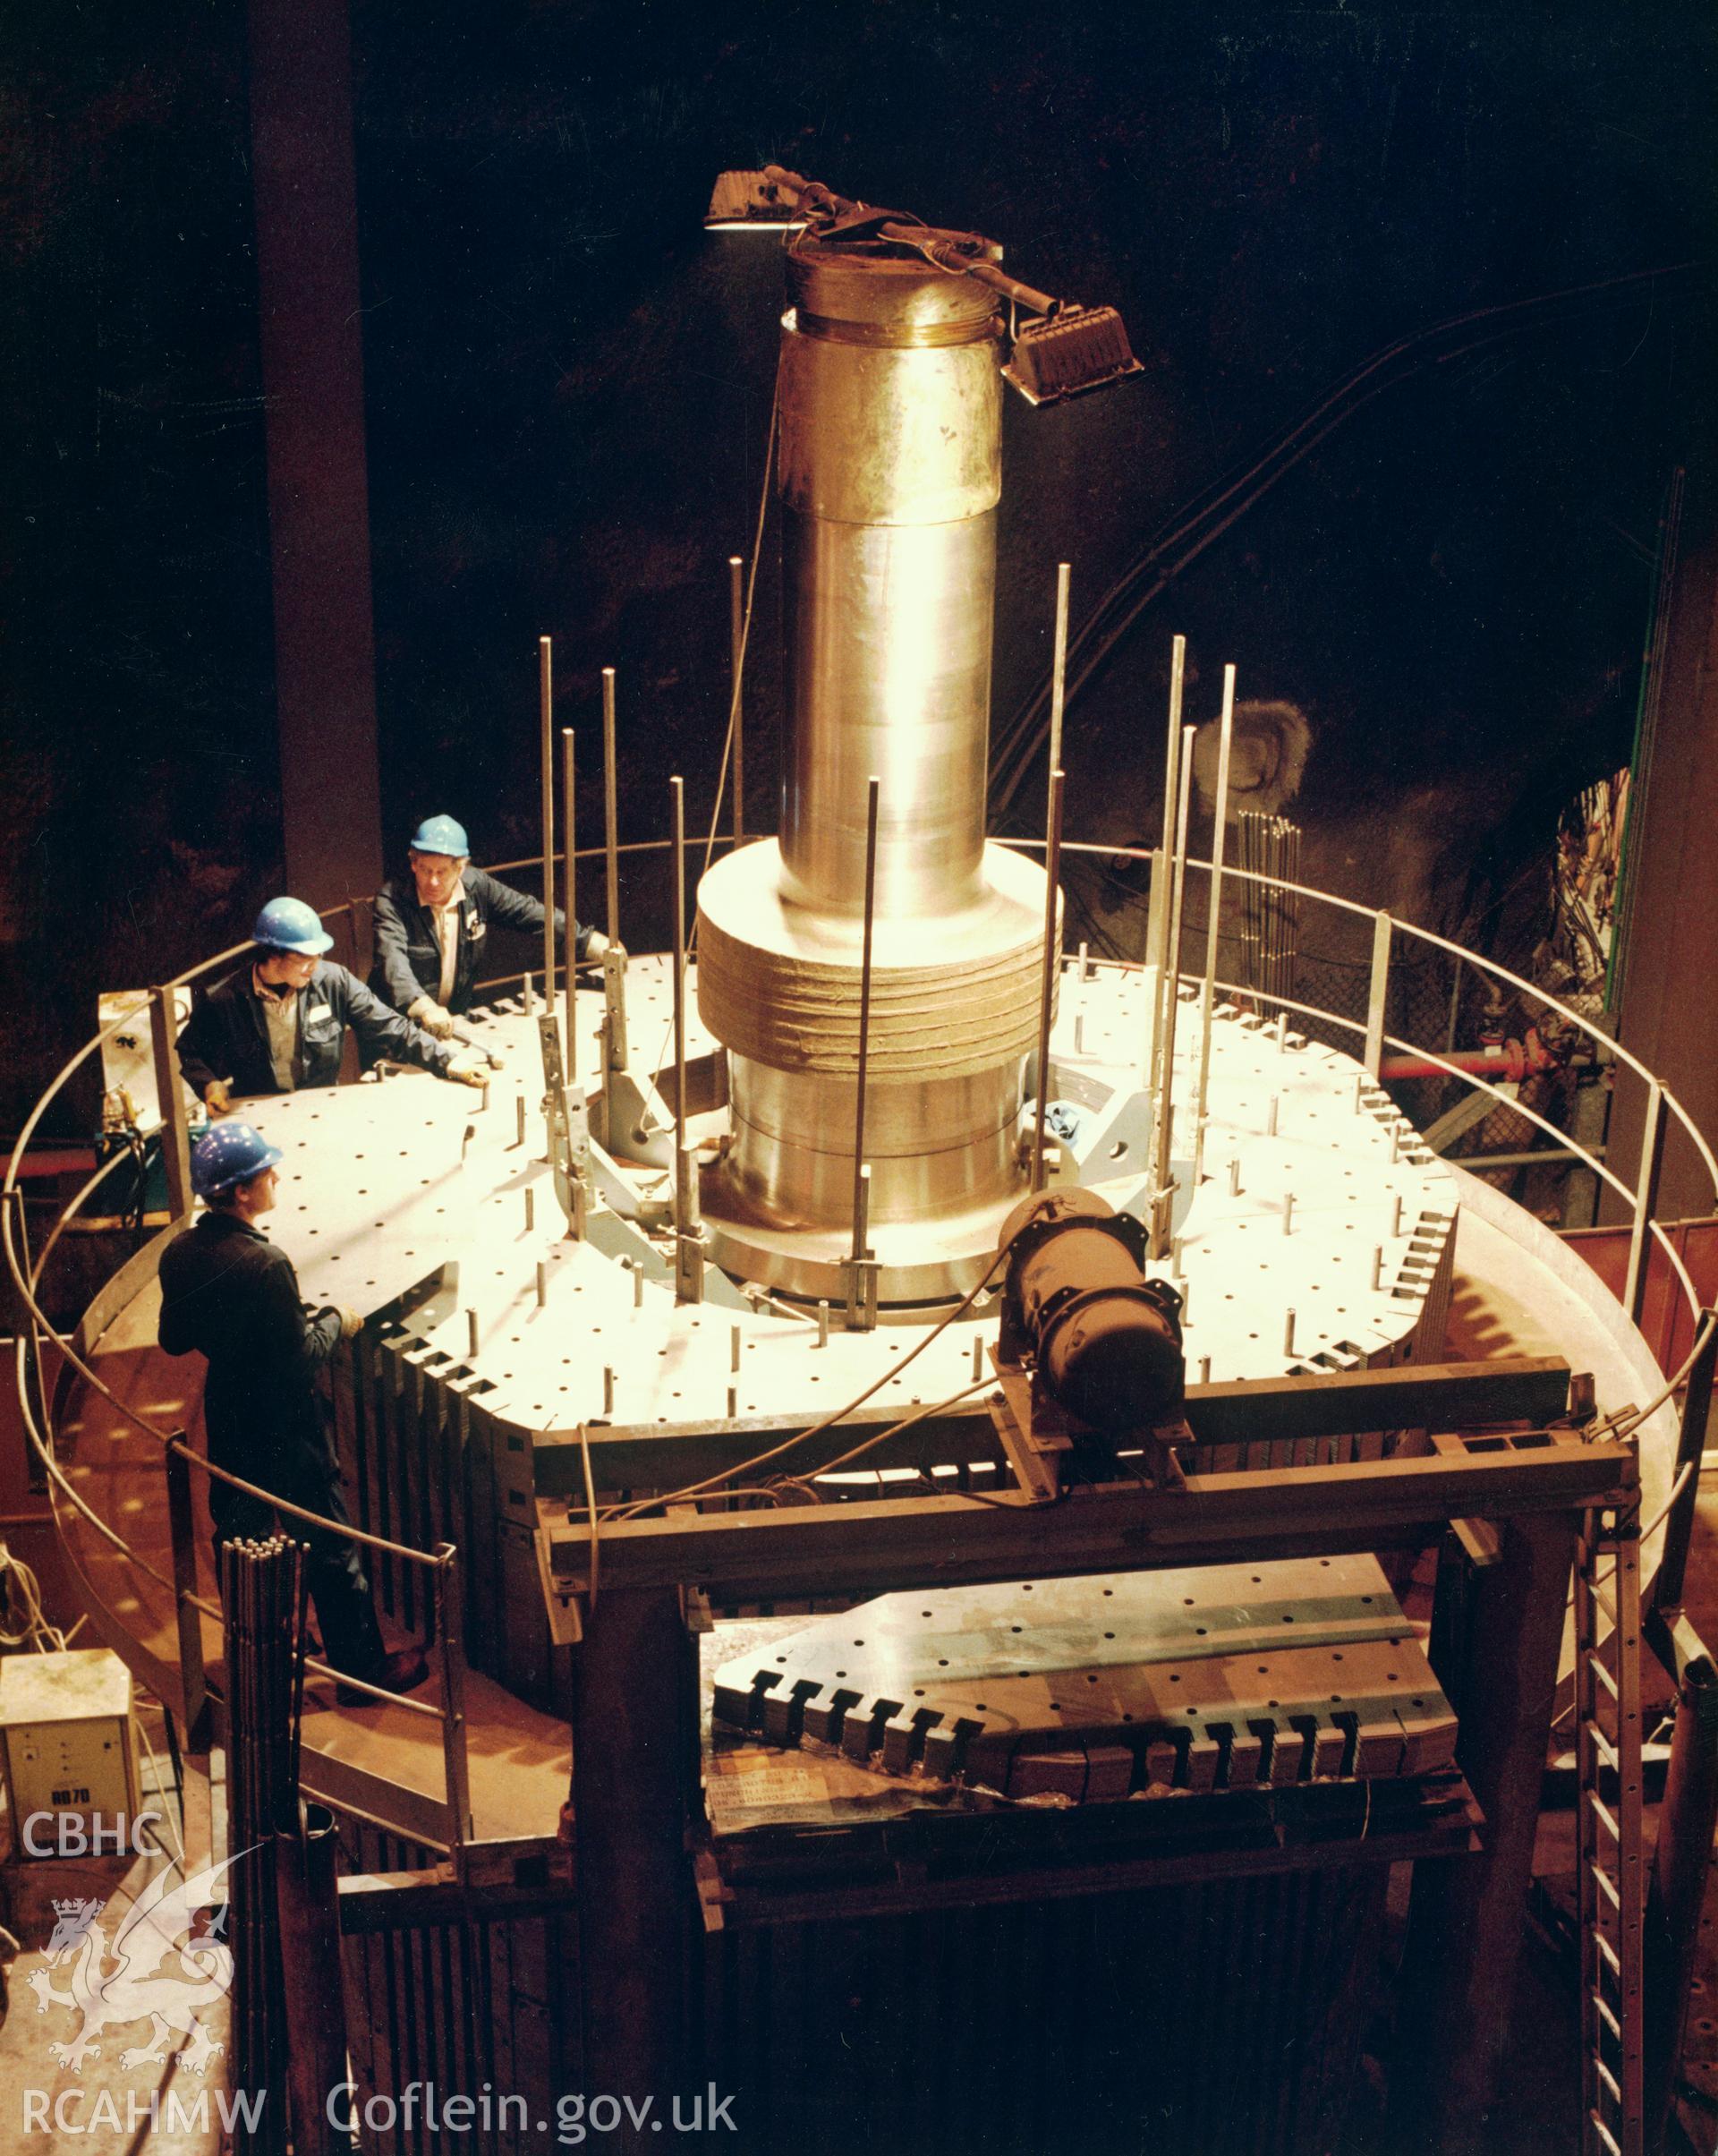 1 colour print showing assembly work on one of the reversible generator motors on top of the main shaft at Dinorwig Power Station; collated by the former Central Office of Information.